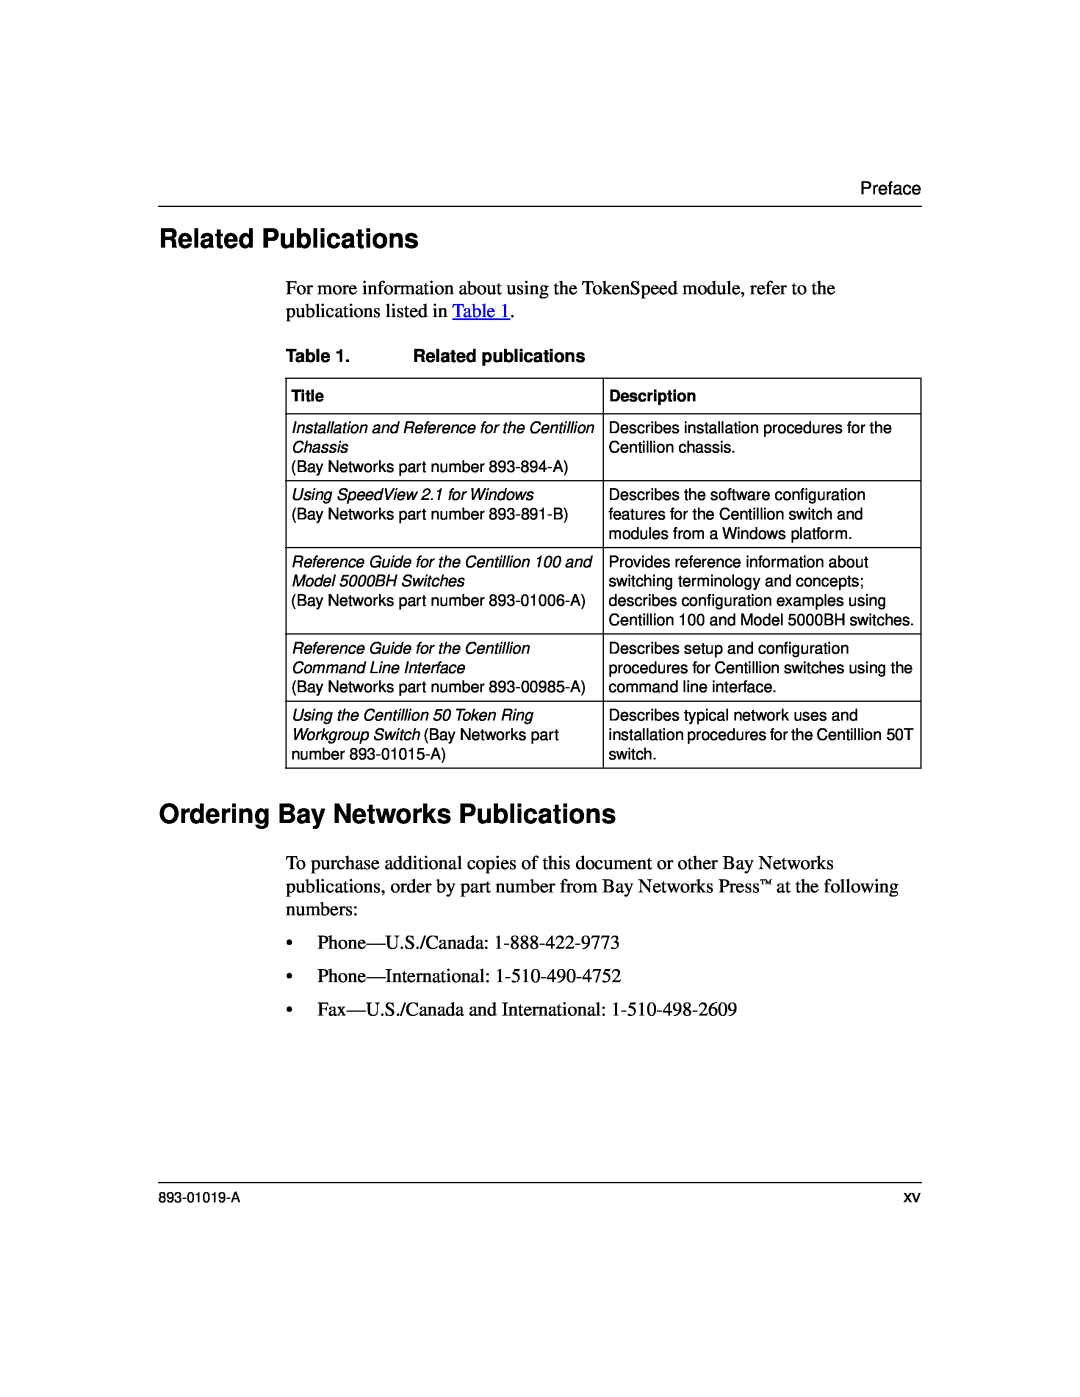 Nortel Networks 5000BH Related Publications, Ordering Bay Networks Publications, Preface, Related publications, Chassis 